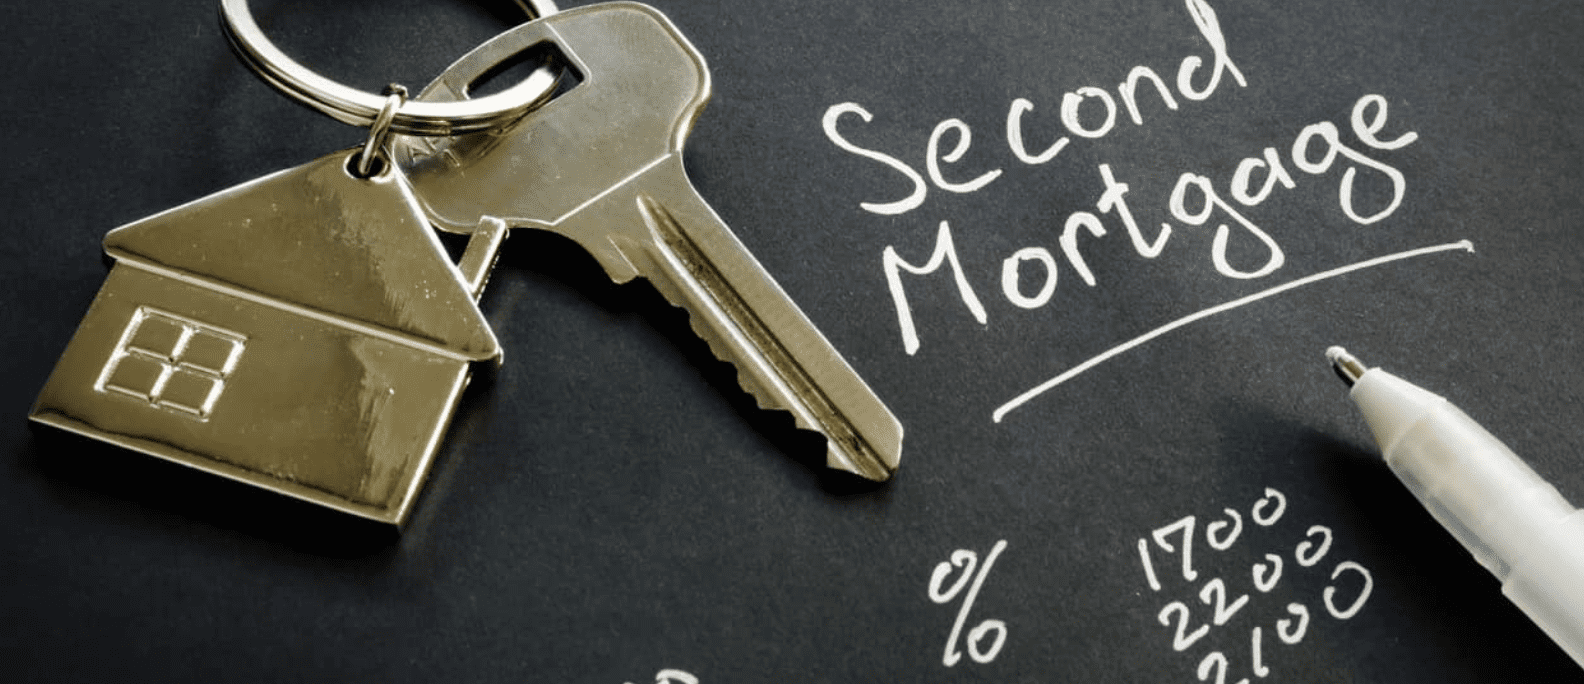 Second Mortgages: Are They a Good Idea?